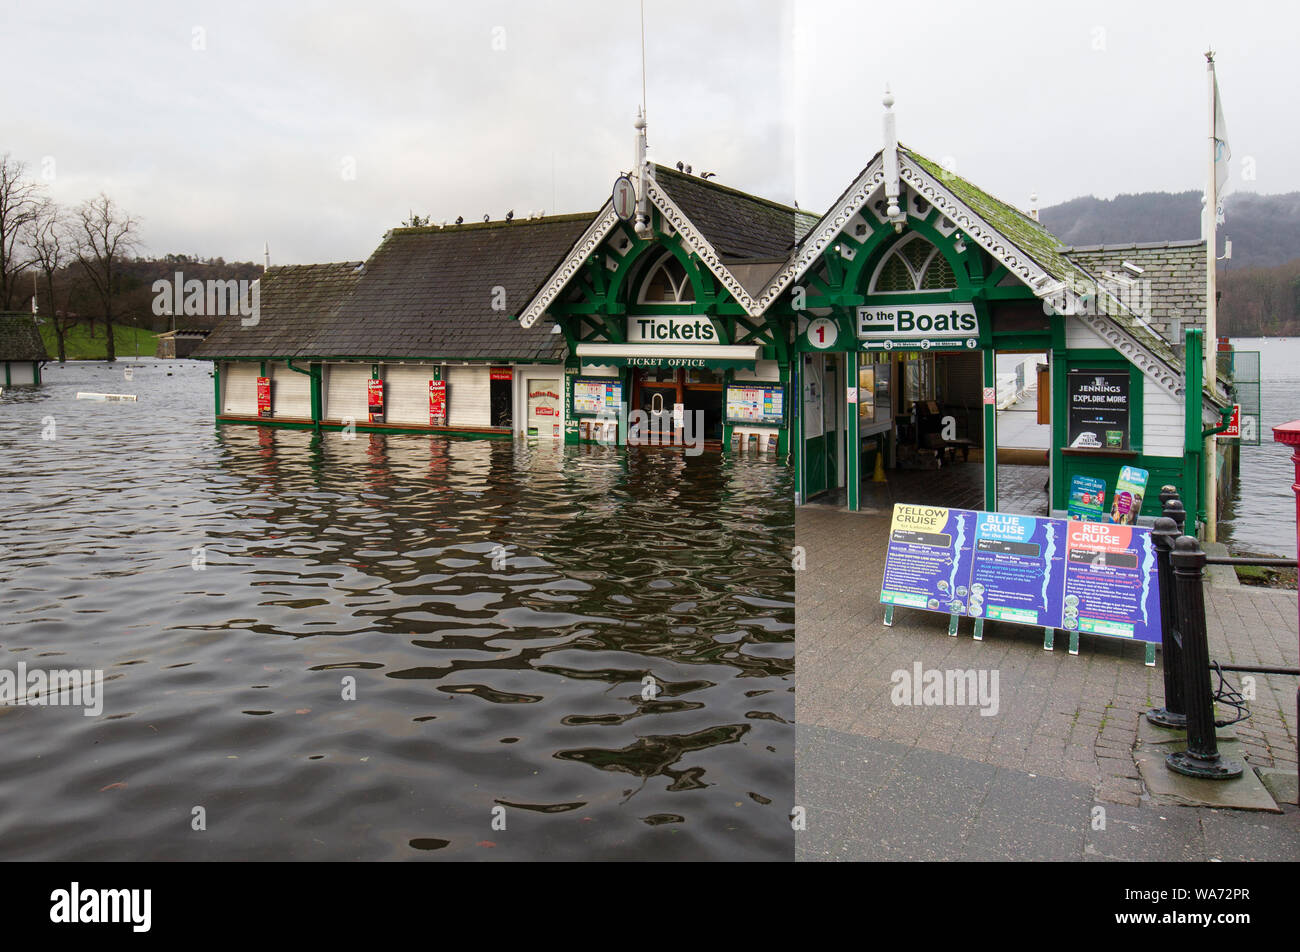 Storm Desmond .A series of photos taken 18th December matched with photos taken on the 6th December 2015 As can be seen business was back up and running for Windermere Lake Cruises.The company has a special flood plan that was put into force to limit the losses & damage to the business.allowing it to get back working as fast as possible. Stock Photo